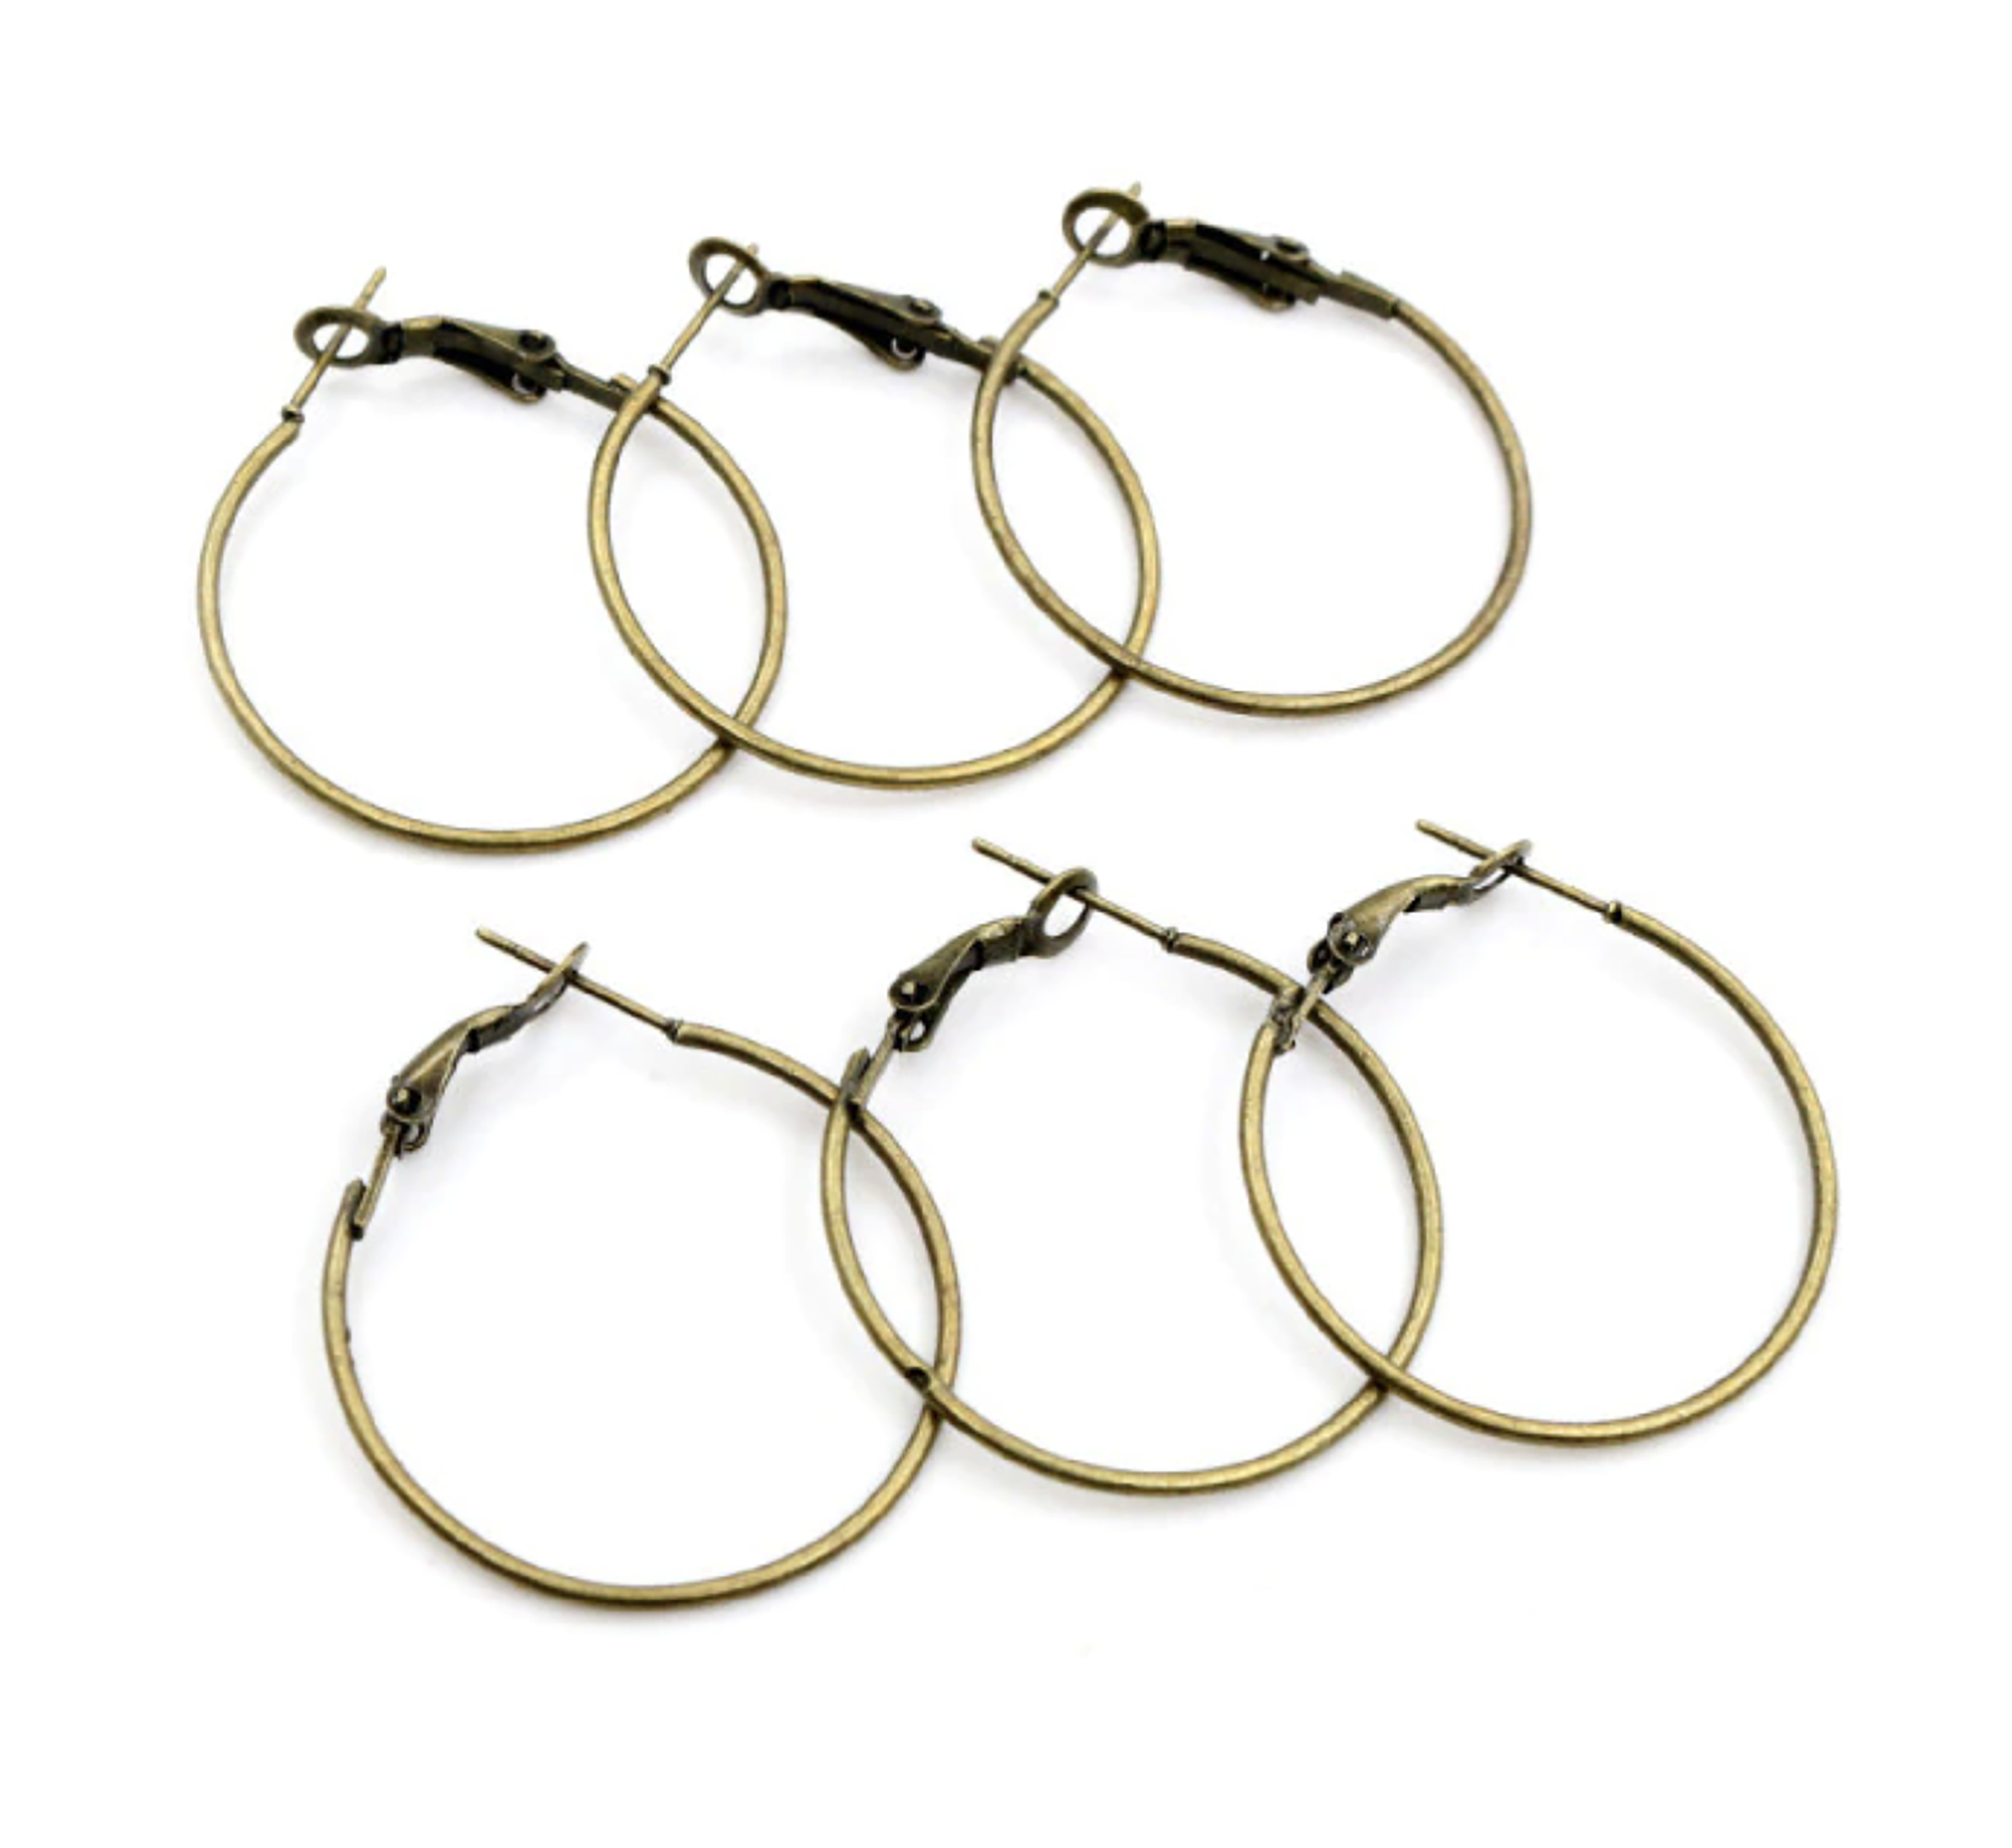 4pcs (2pairs) , 20mm/25mm/30mm x 1mm, Iron Hoop Earring in Antique Bronze